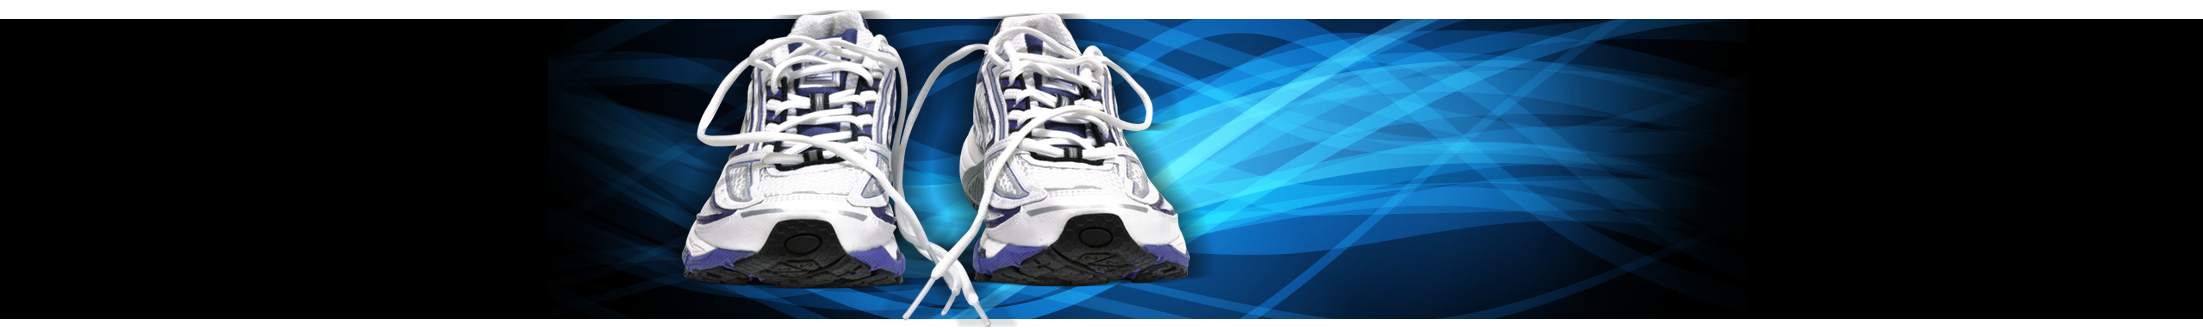 Anderson Peak Performance reviews page - image of a pair of trainers